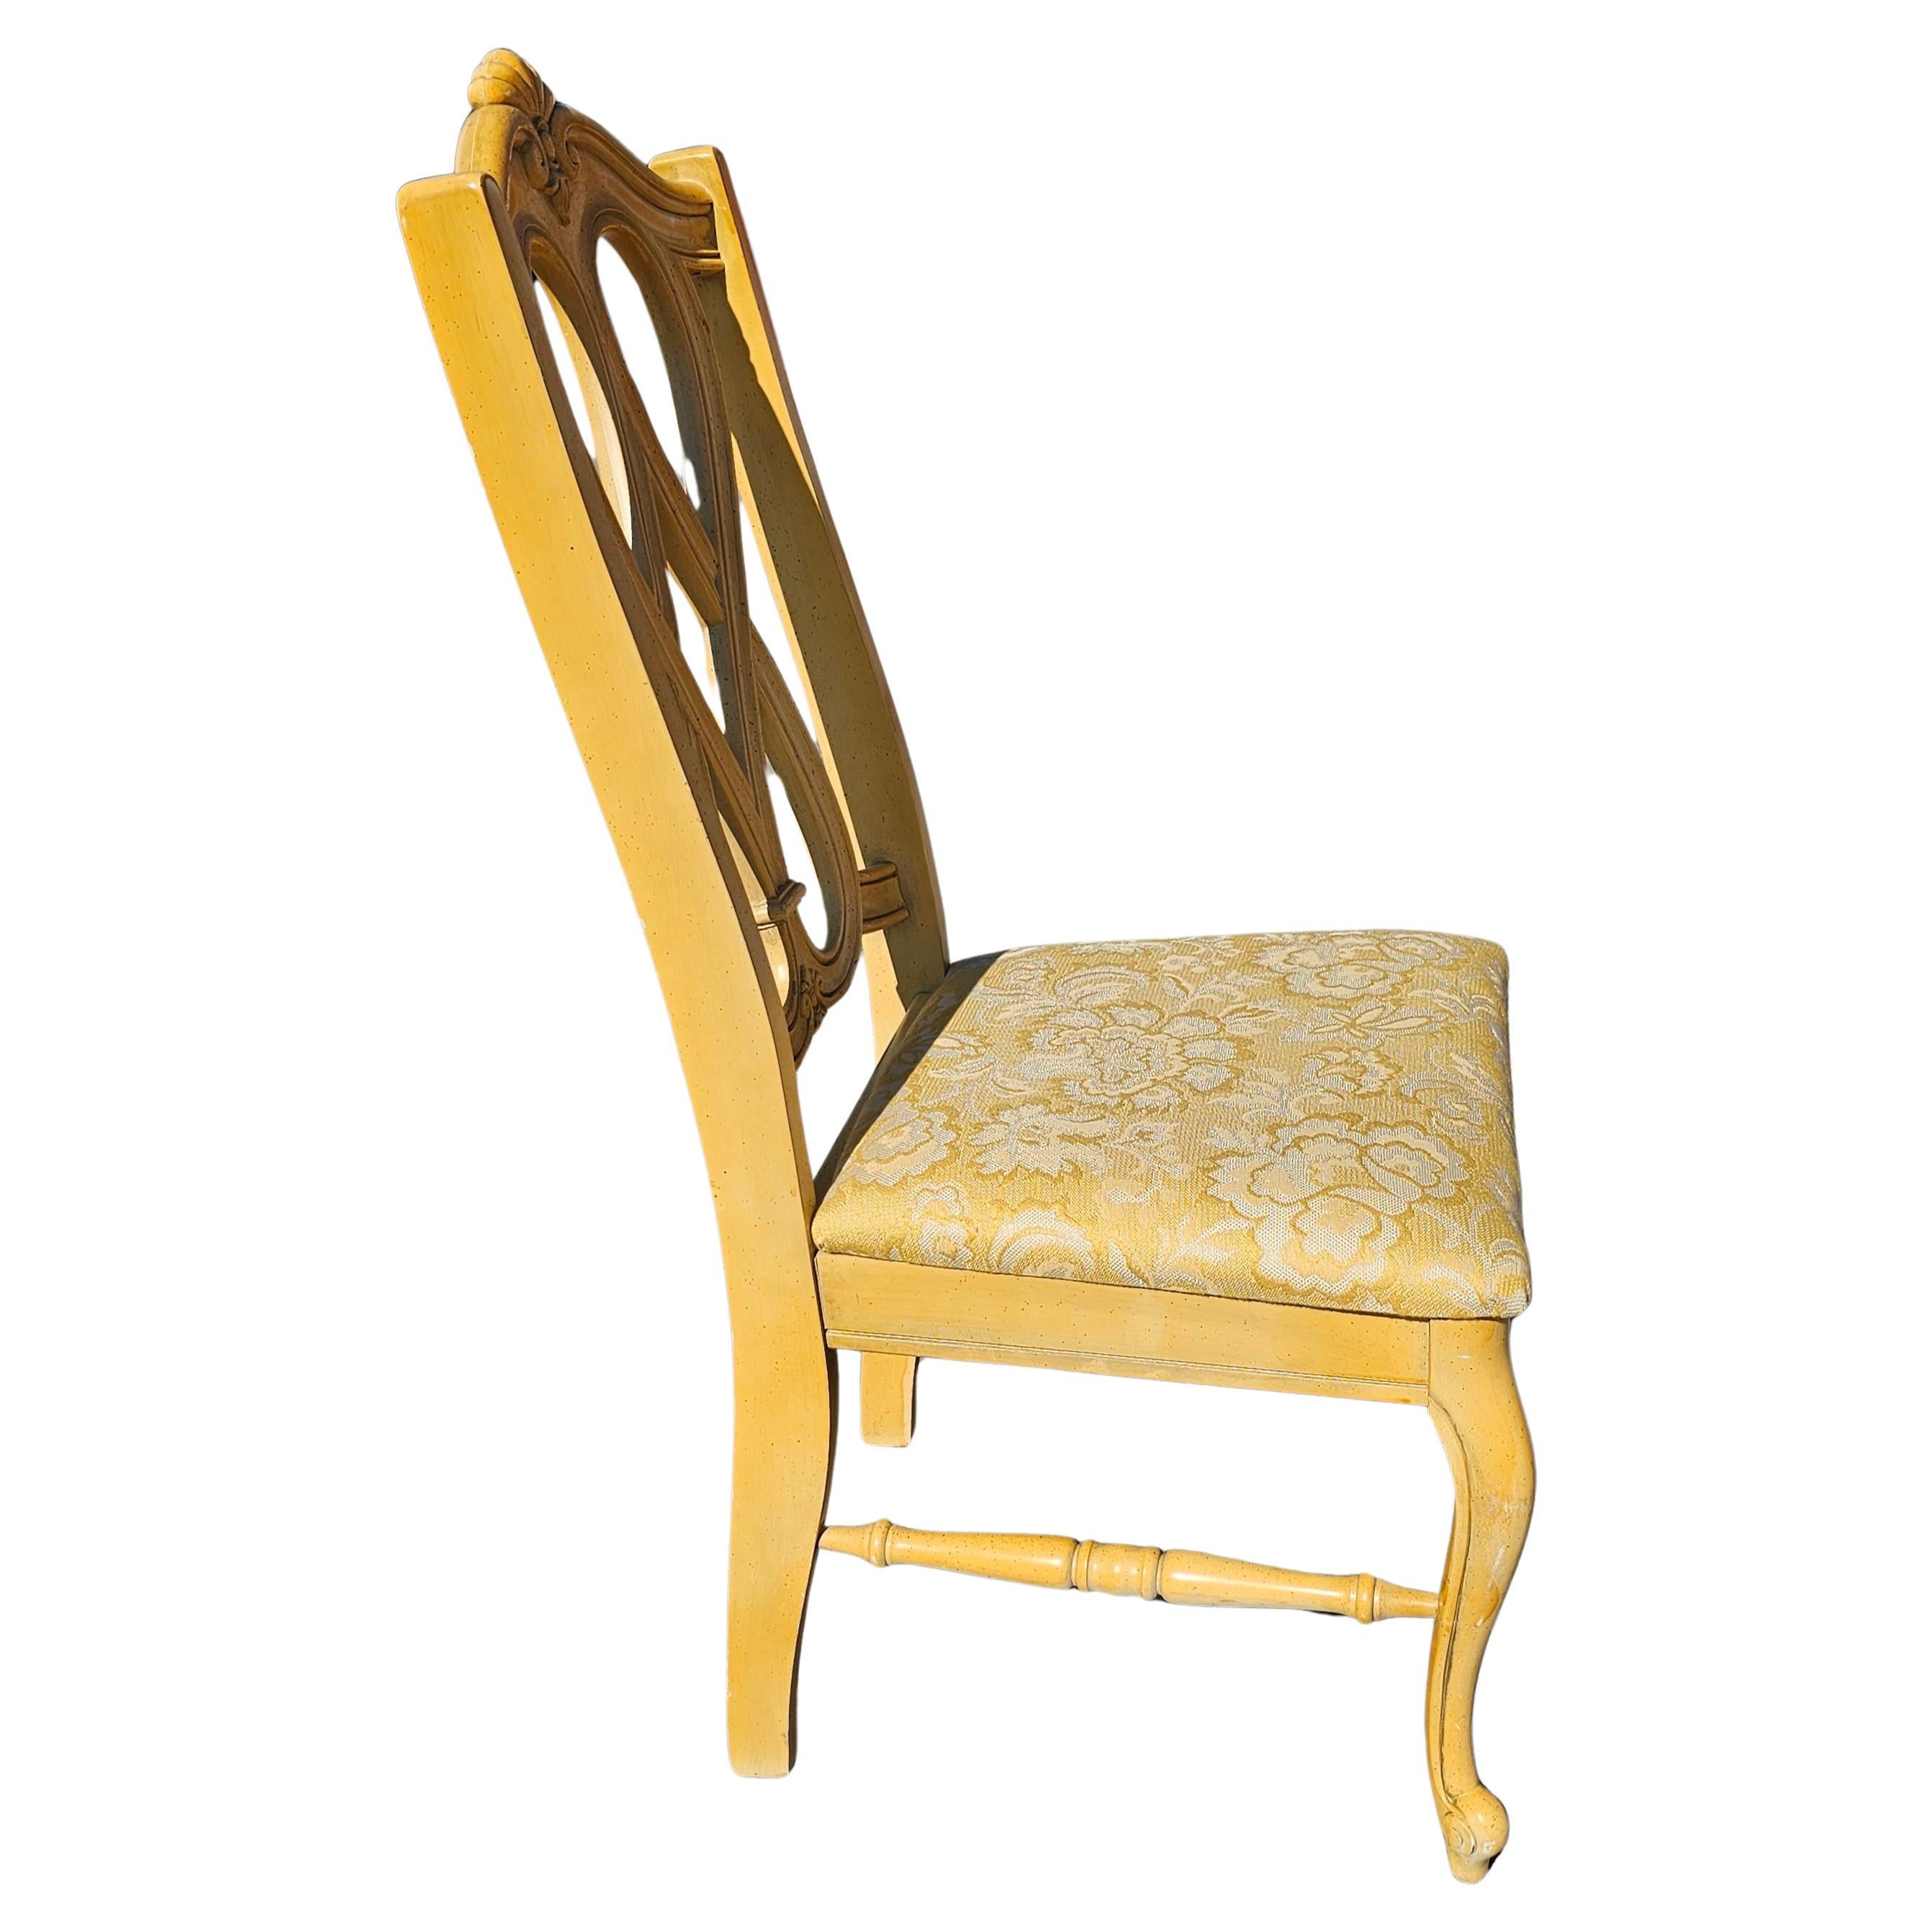 A very decorative yellow painted Mahogany and Upholstered Seat Trogdon Furniture side chair in great vintage condition. Measures 20